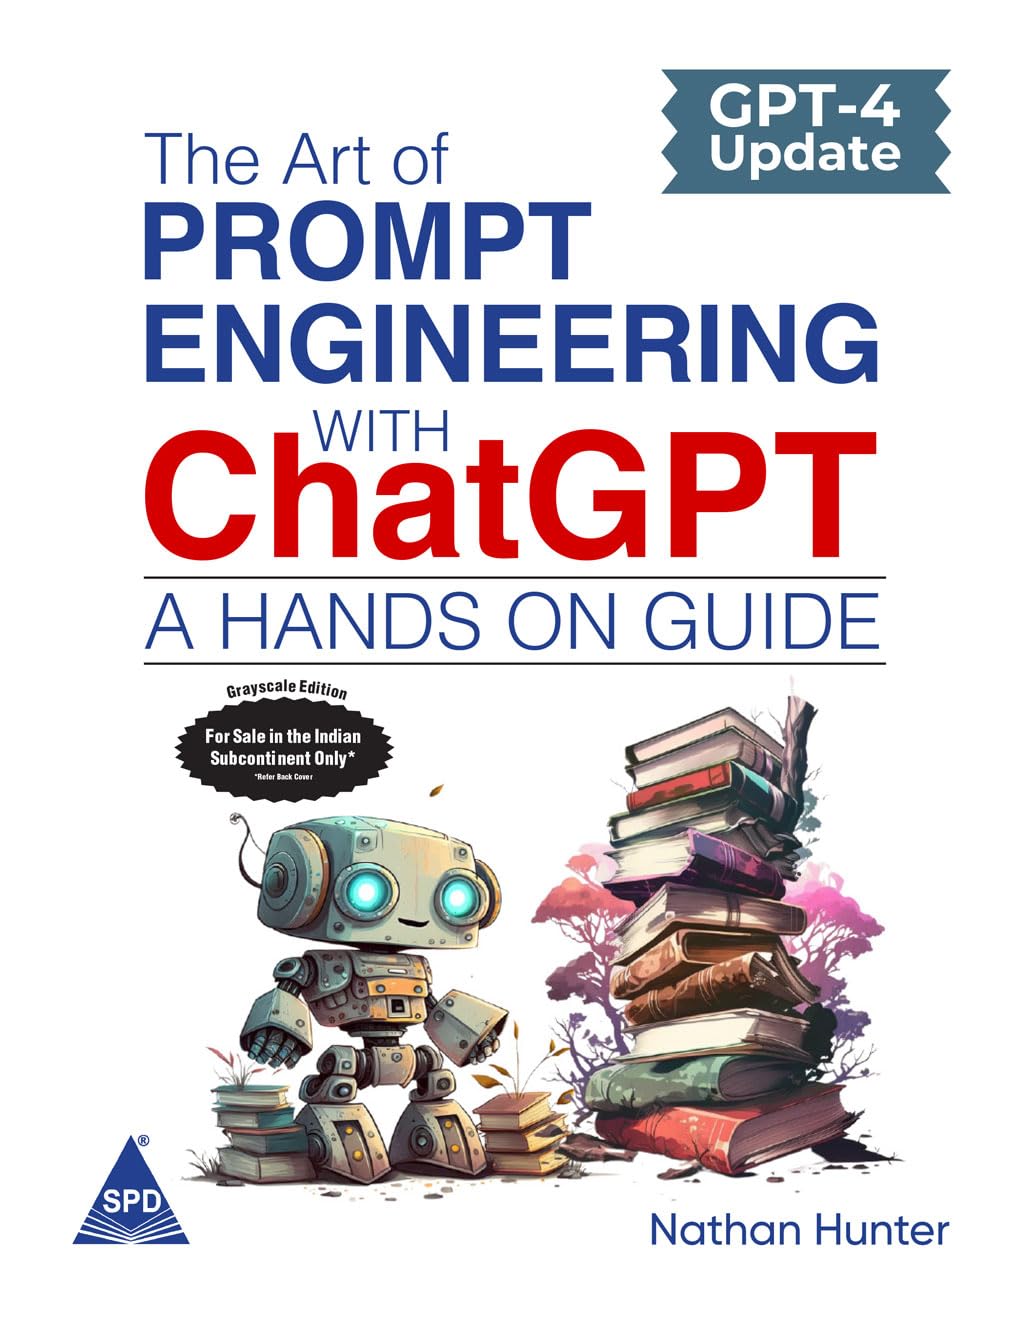 The Art of Prompt Engineering with ChatGPT: A Hands-On Guide - Learn AI Tools the Fun Way! (Grayscale Indian Edition)